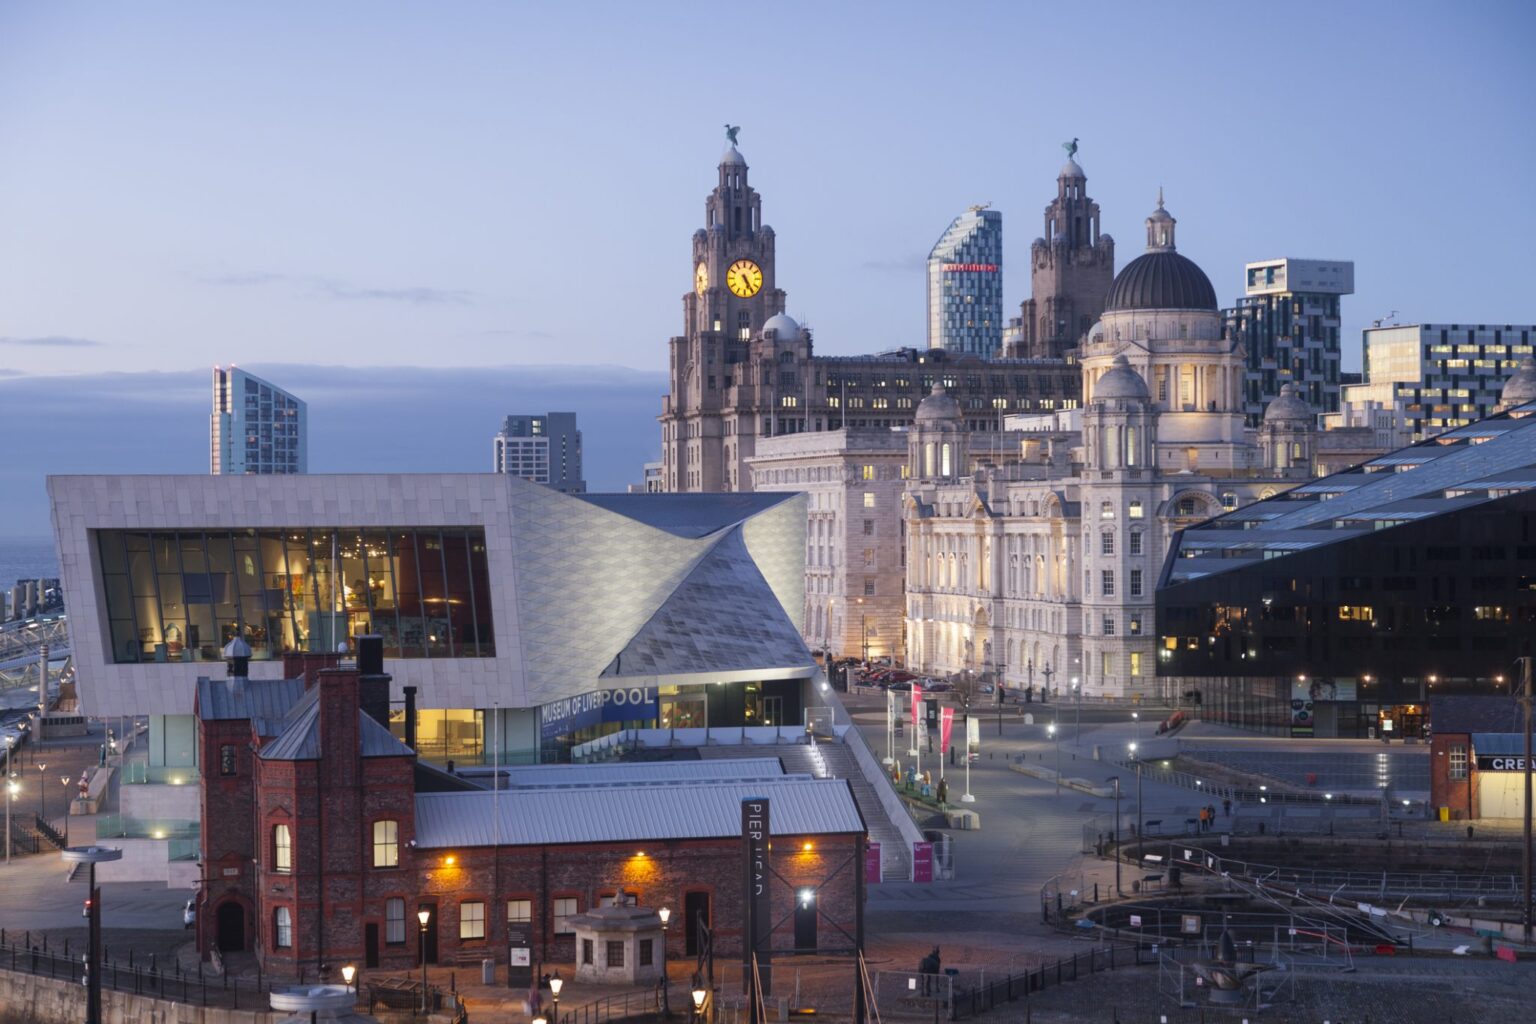 Photo showing significant historic buildings in Liverpool